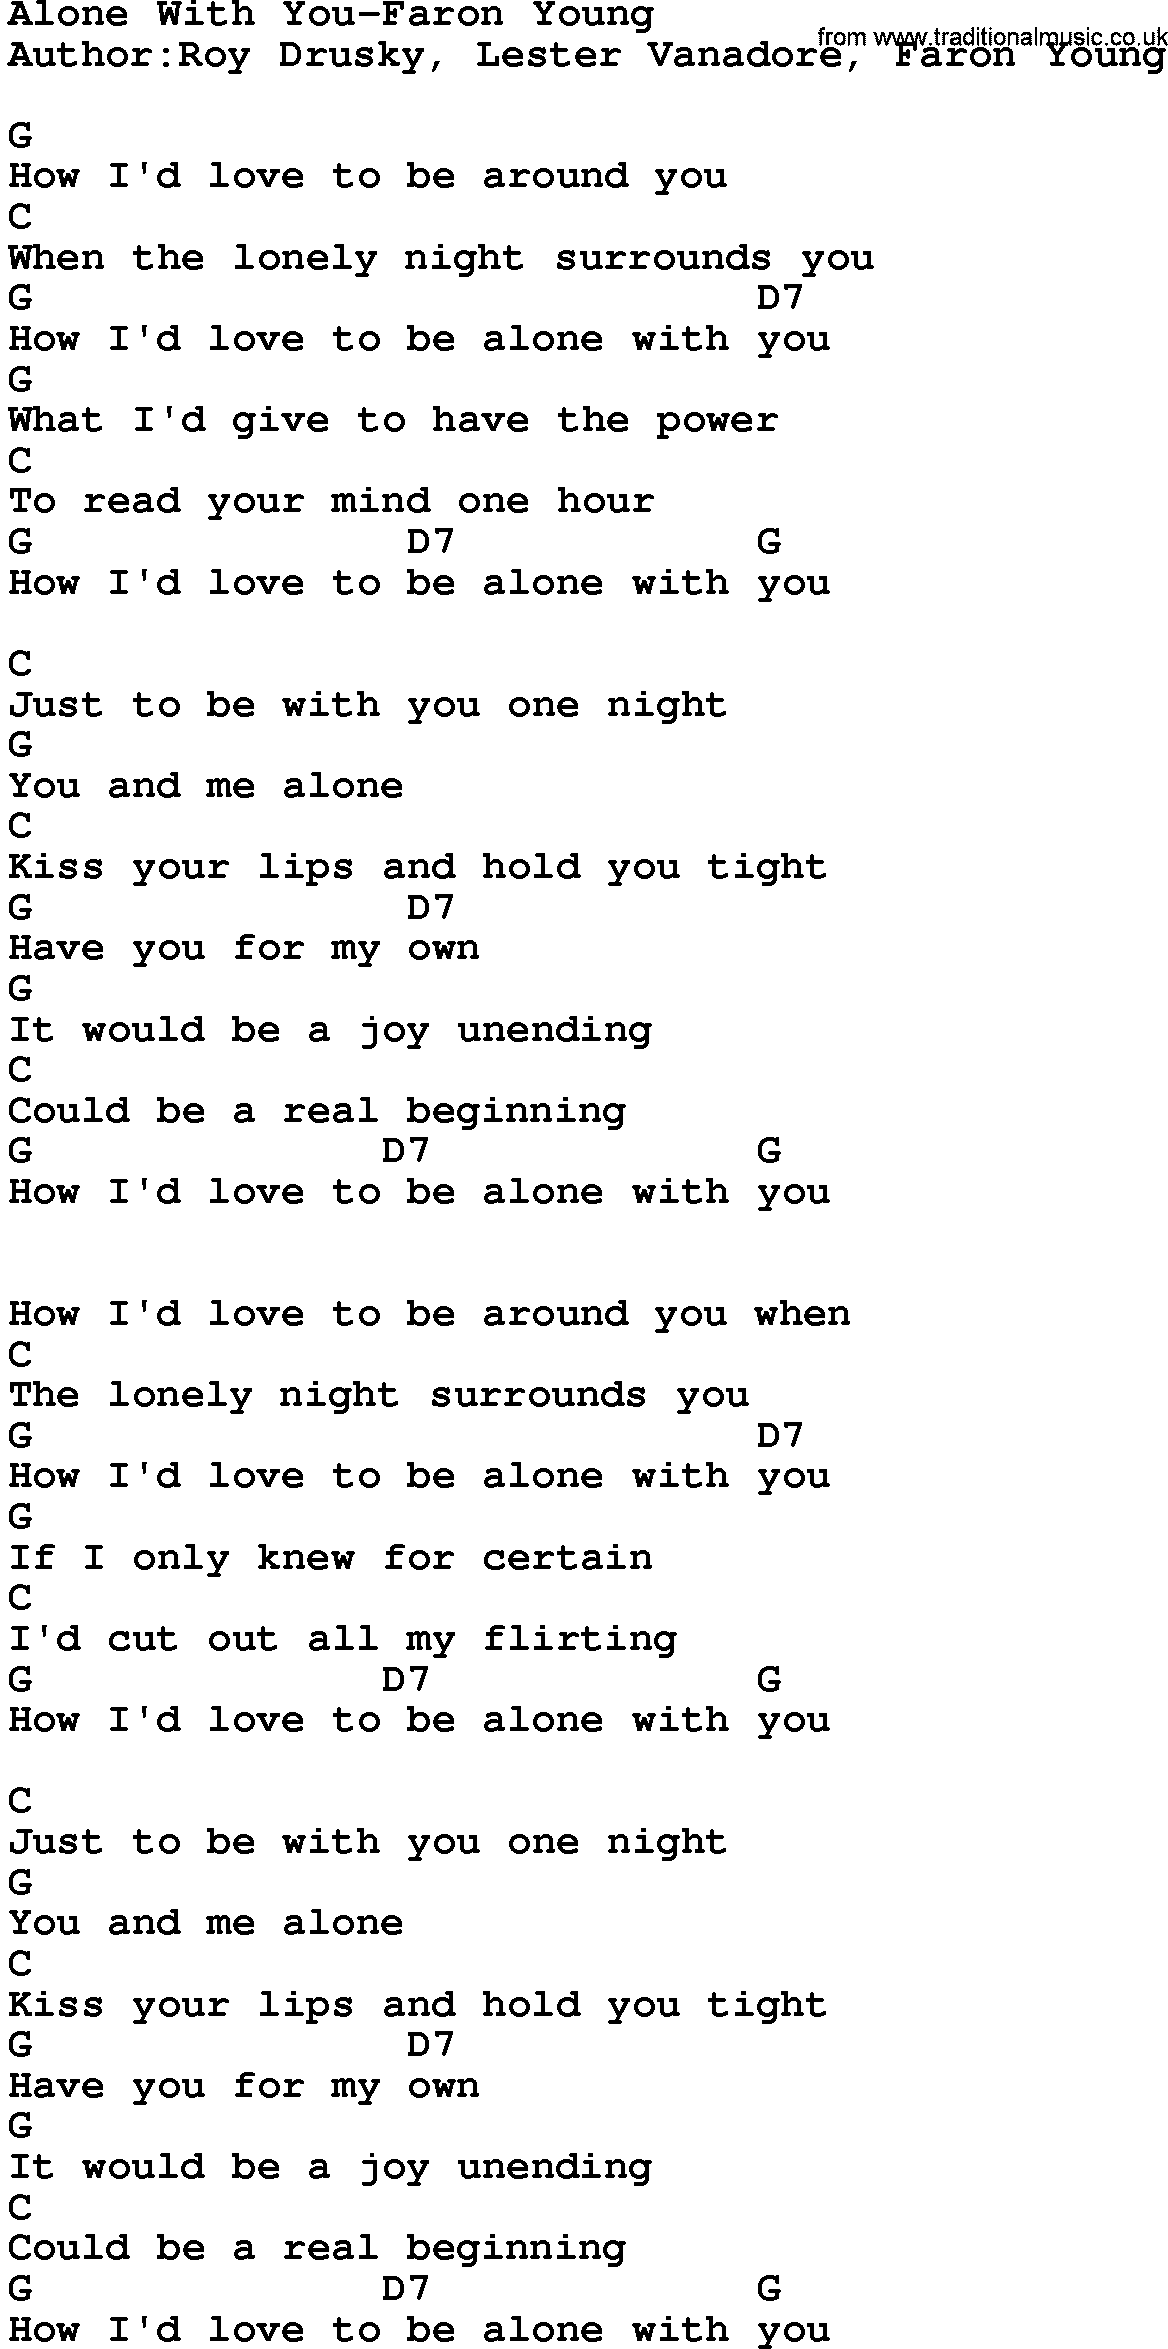 Country music song: Alone With You-Faron Young lyrics and chords